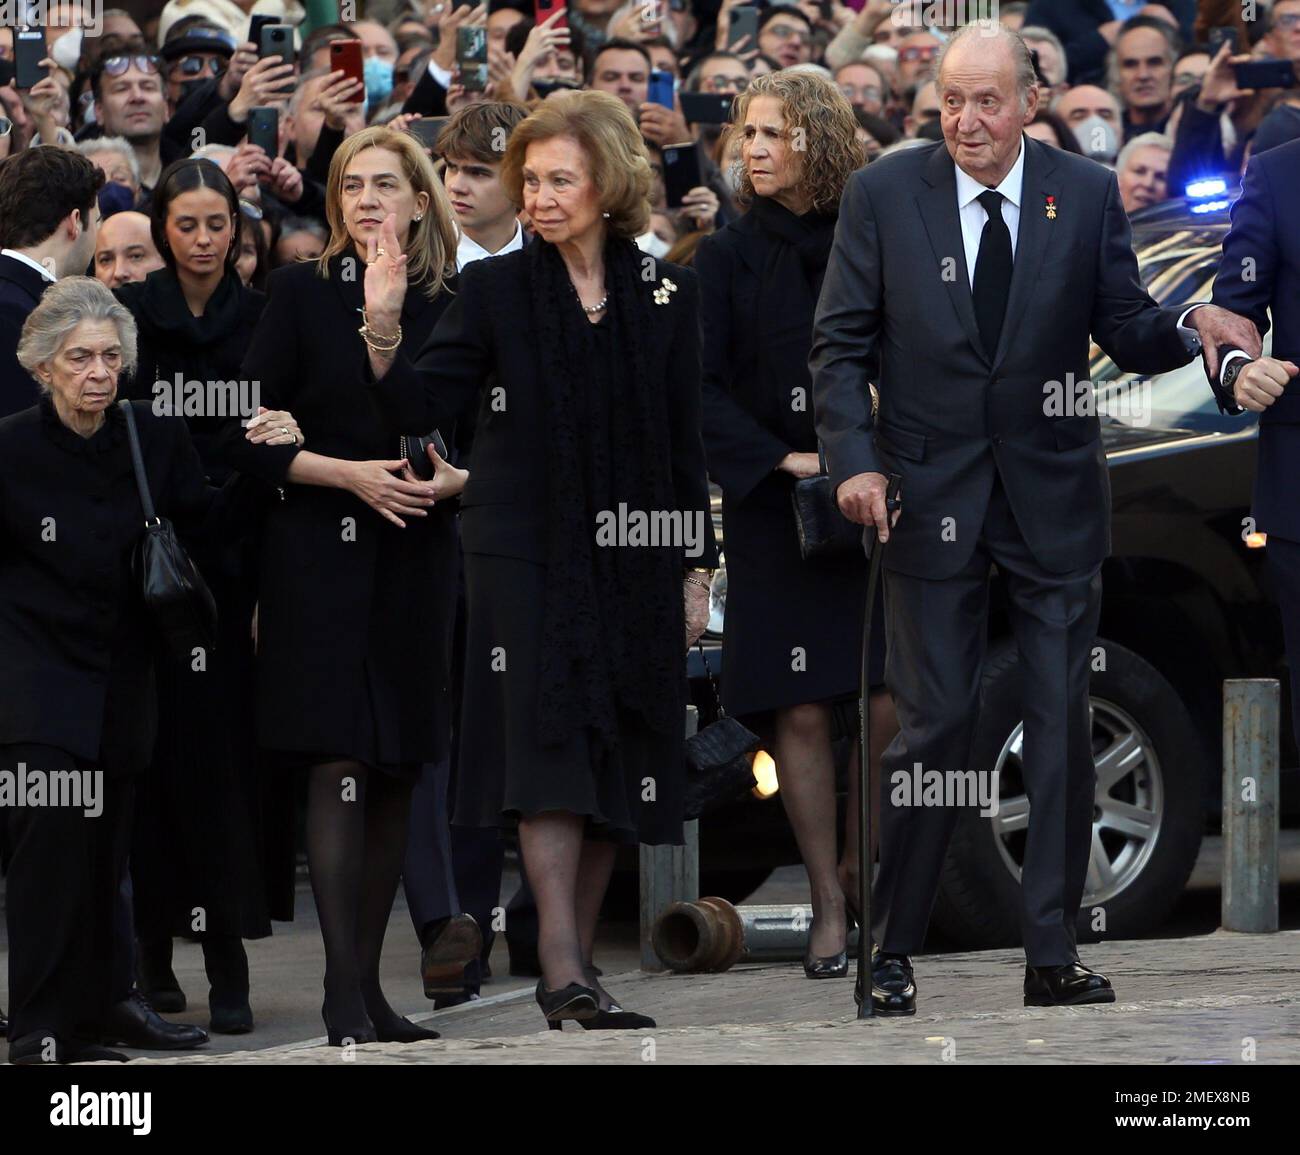 King Juan Carlos and Queen Sofia of Spain with their daughters attend at the funeral for former King Constantine II of Greece, in Metropolitan Cathedral Stock Photo